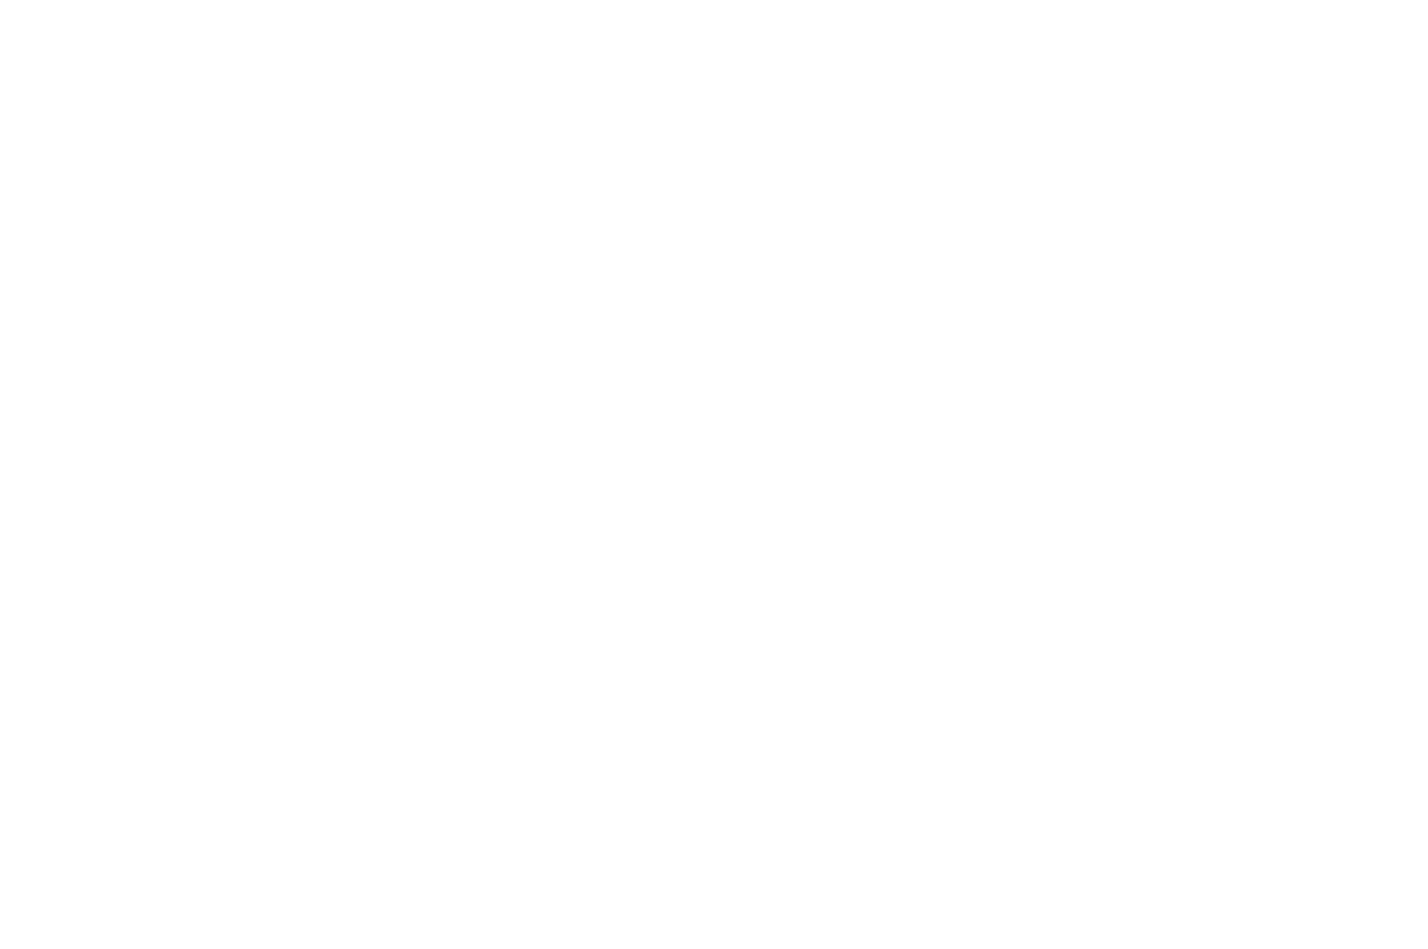 Outer Room